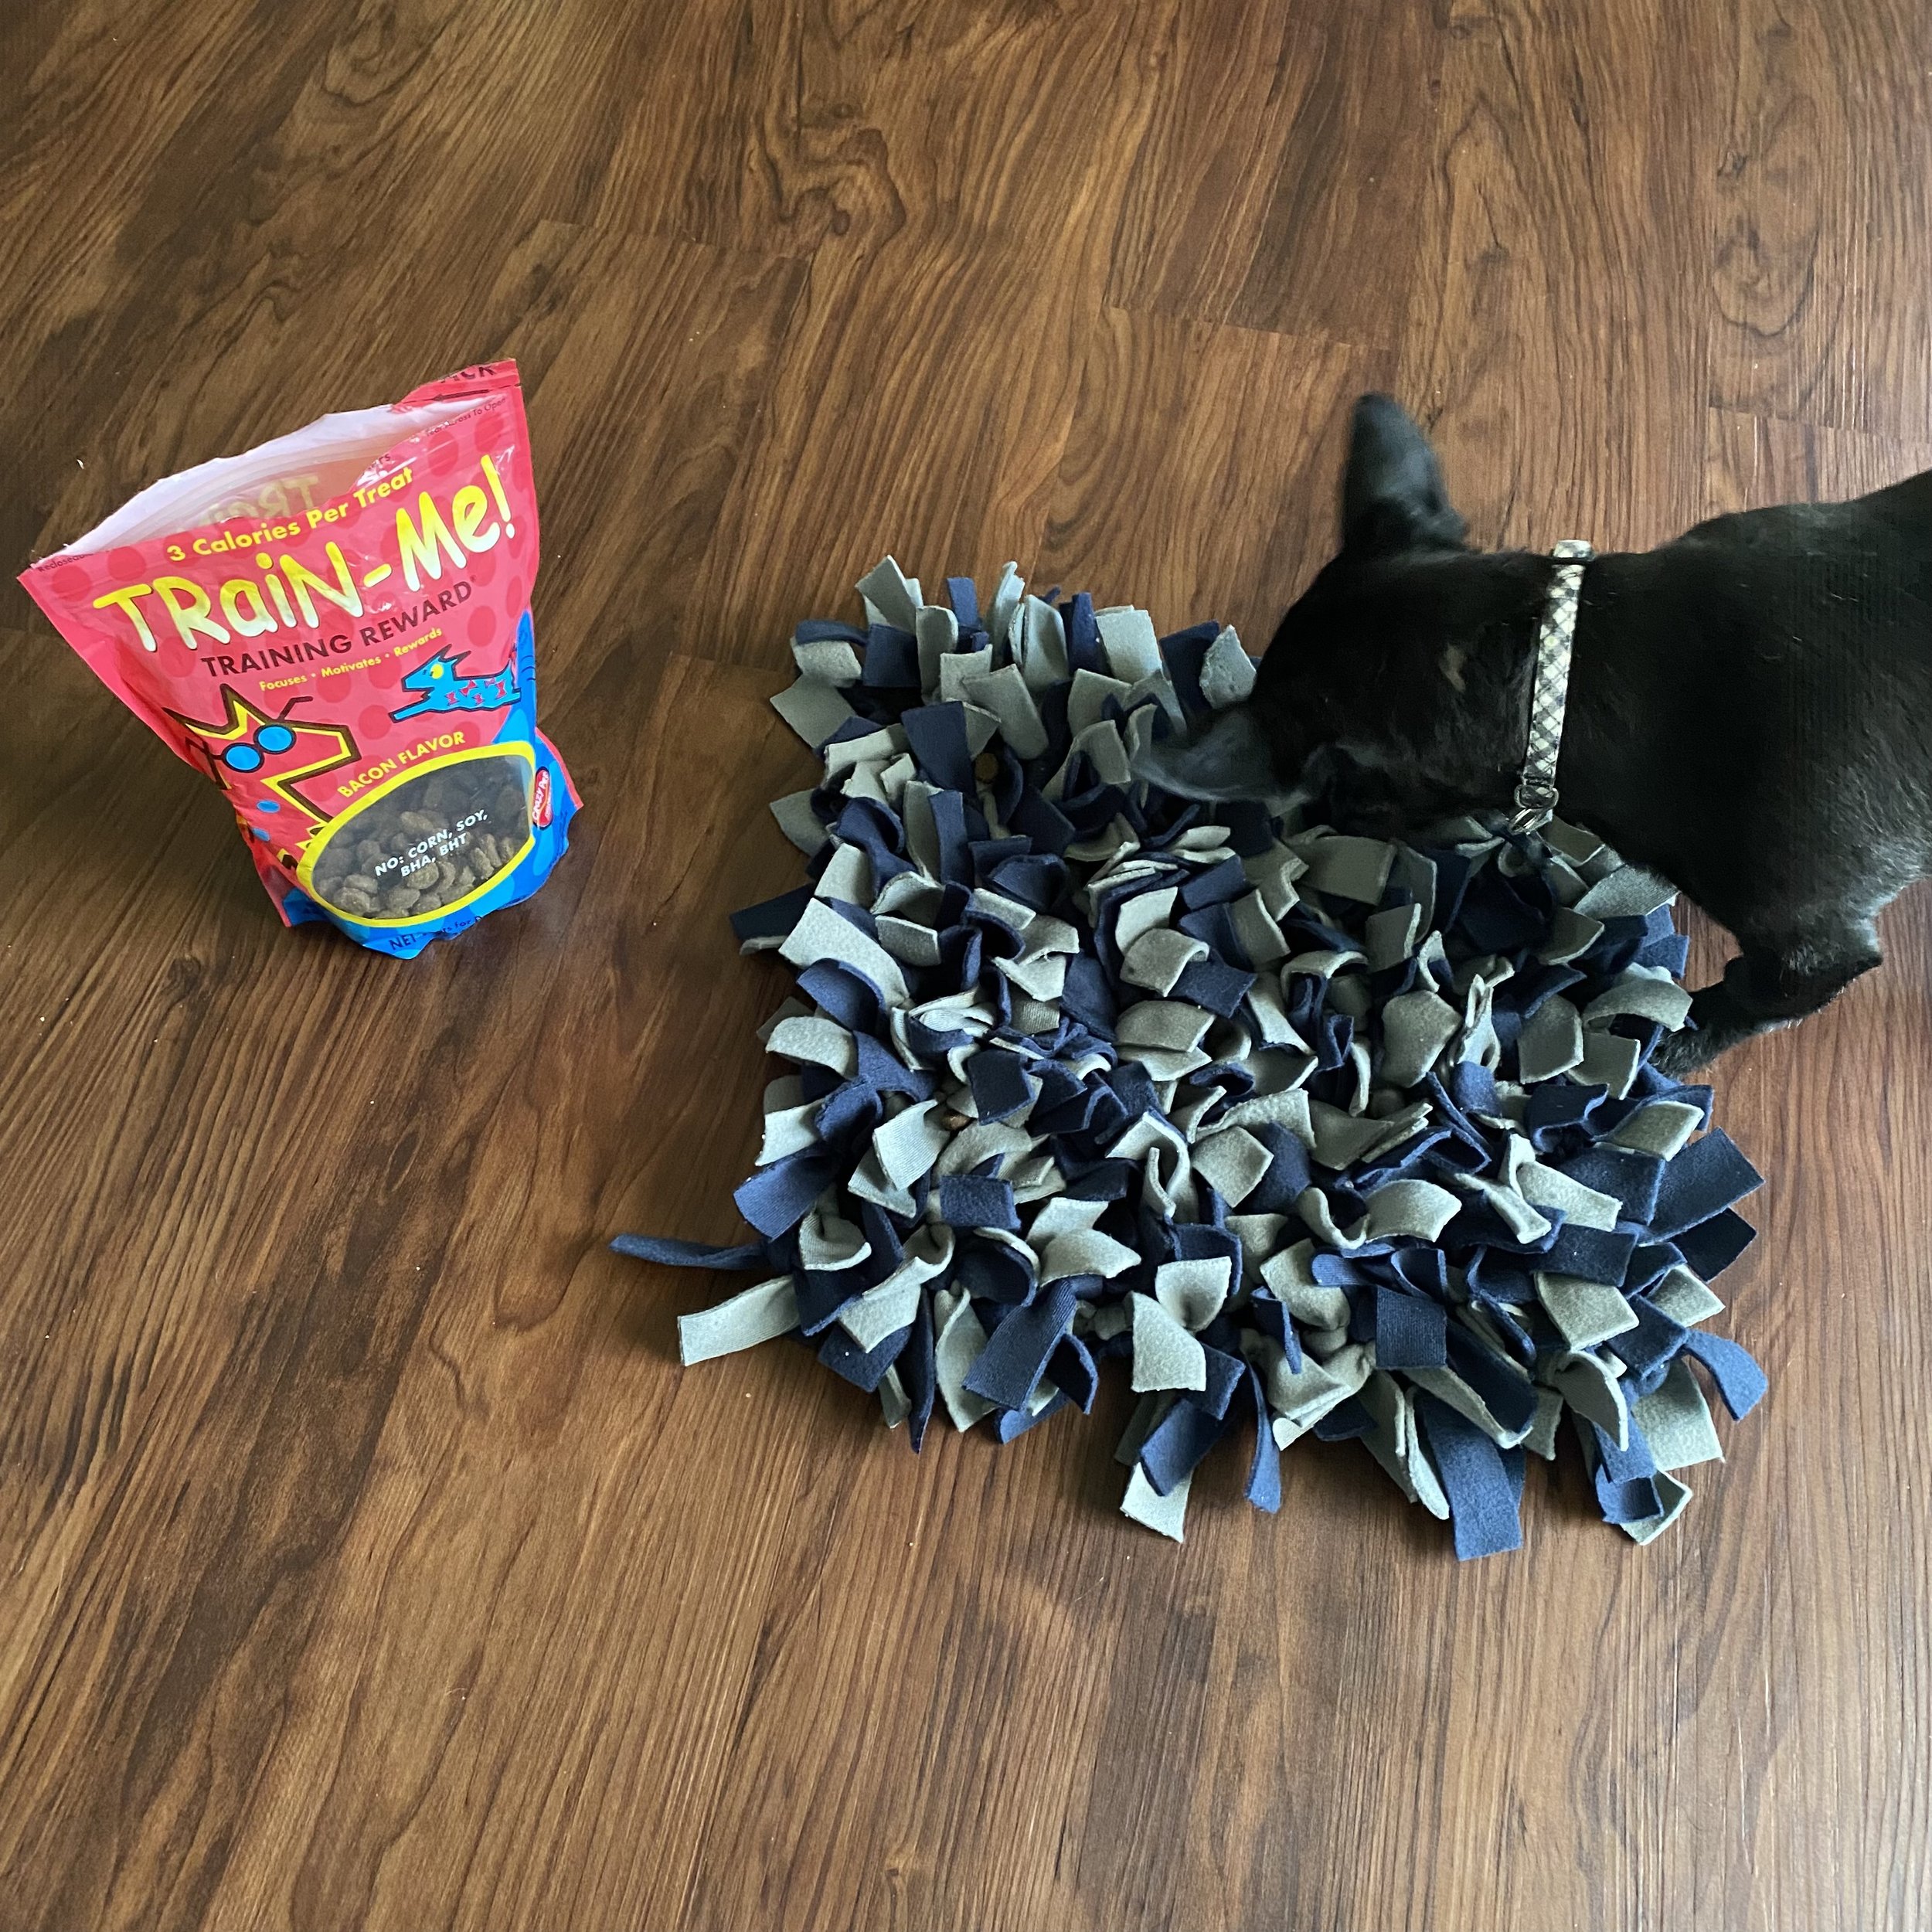 What Is a Dog Snuffle Mat, and What Does It Really Do for Your Pup?